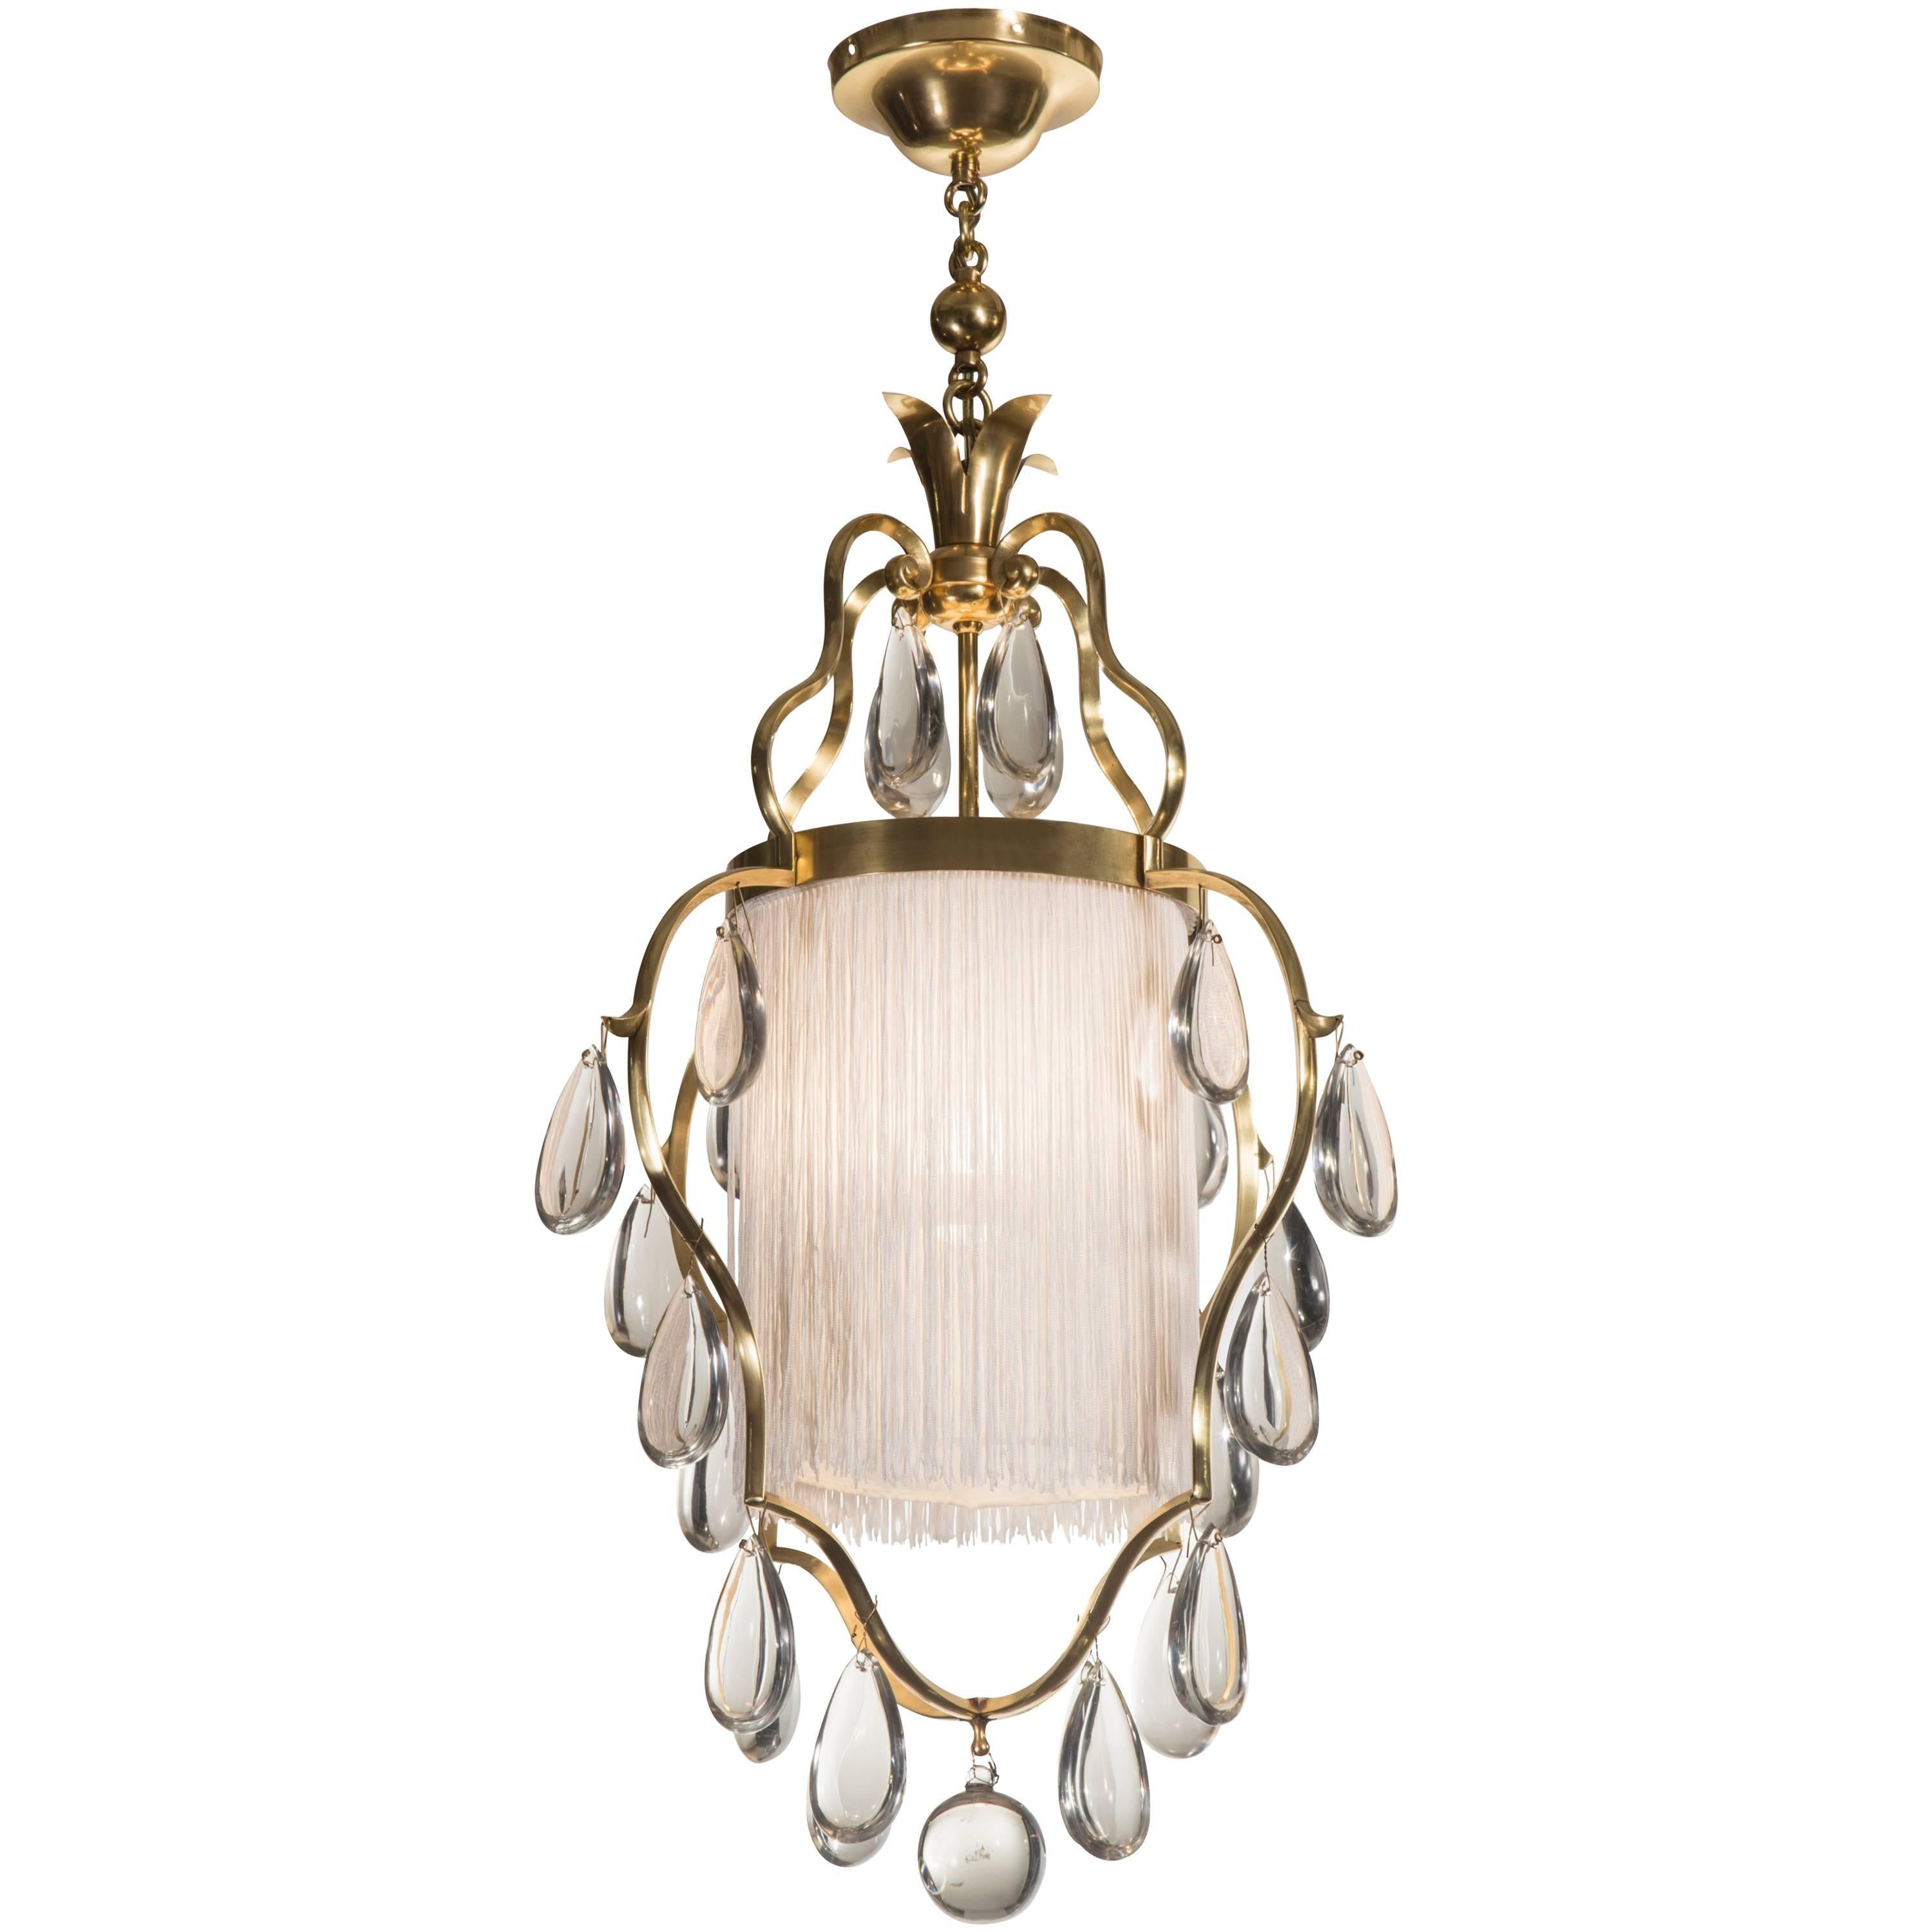 A graceful and exuberant chandelier of the highest quality. The shaped body consisting of four scrolls hung with clear faceted pear-shaped crystals, enclosing a silk shade hung with tassels, terminating in a glass sphere. 

A related chandelier is